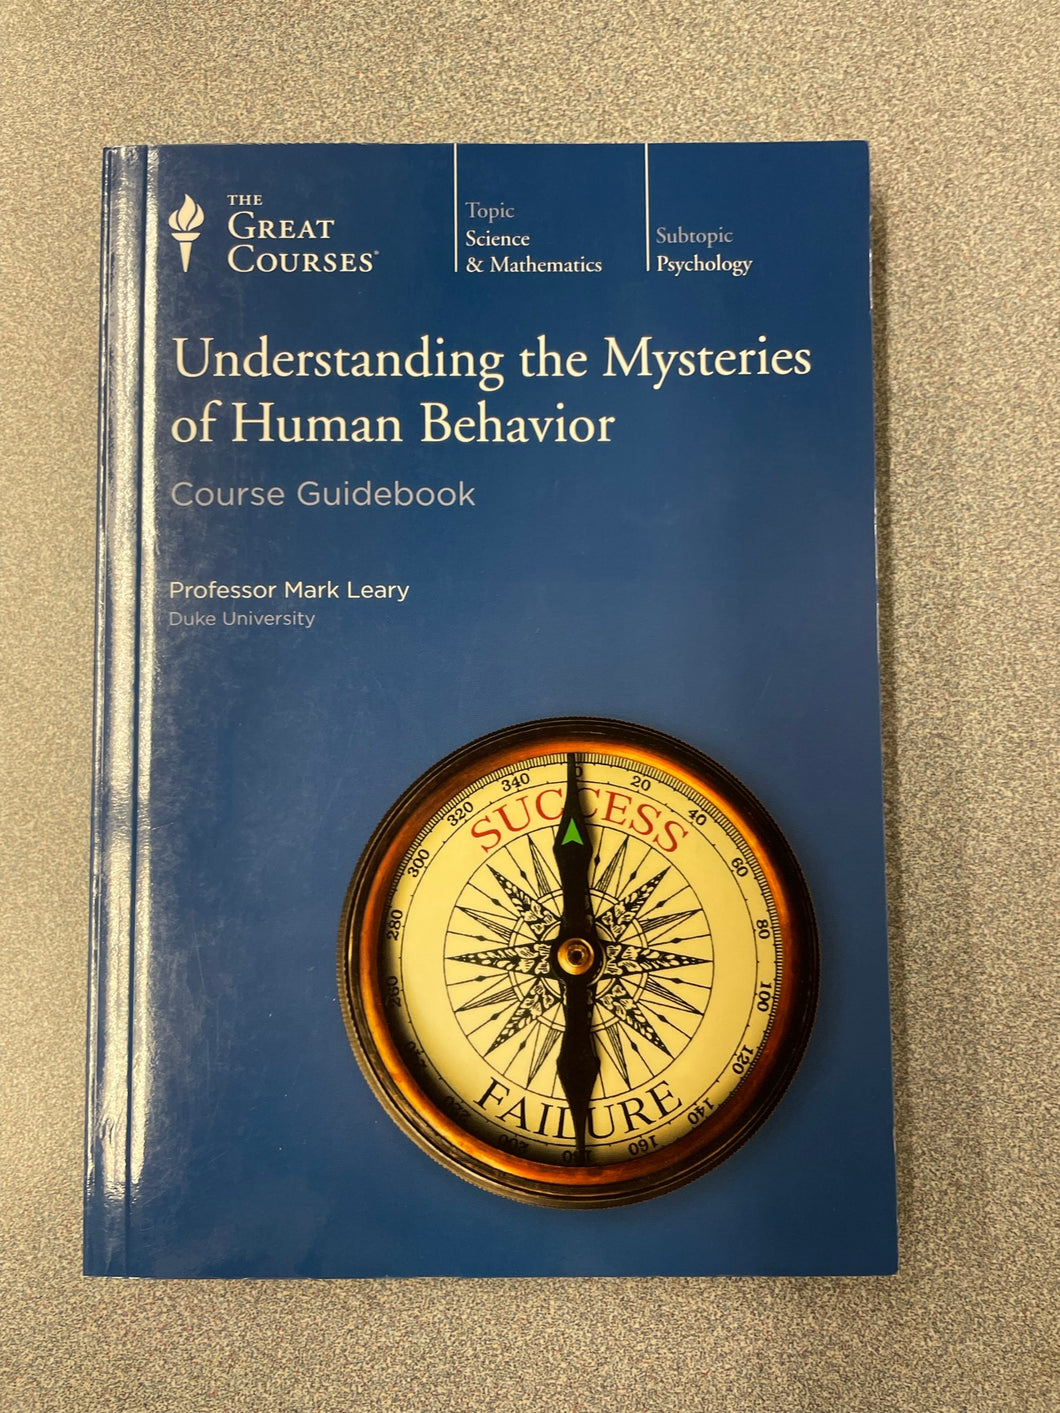 Understanding the Mysteries of Human Behavior Course Guidebook, Leary, Mark [2012] GC 12/22